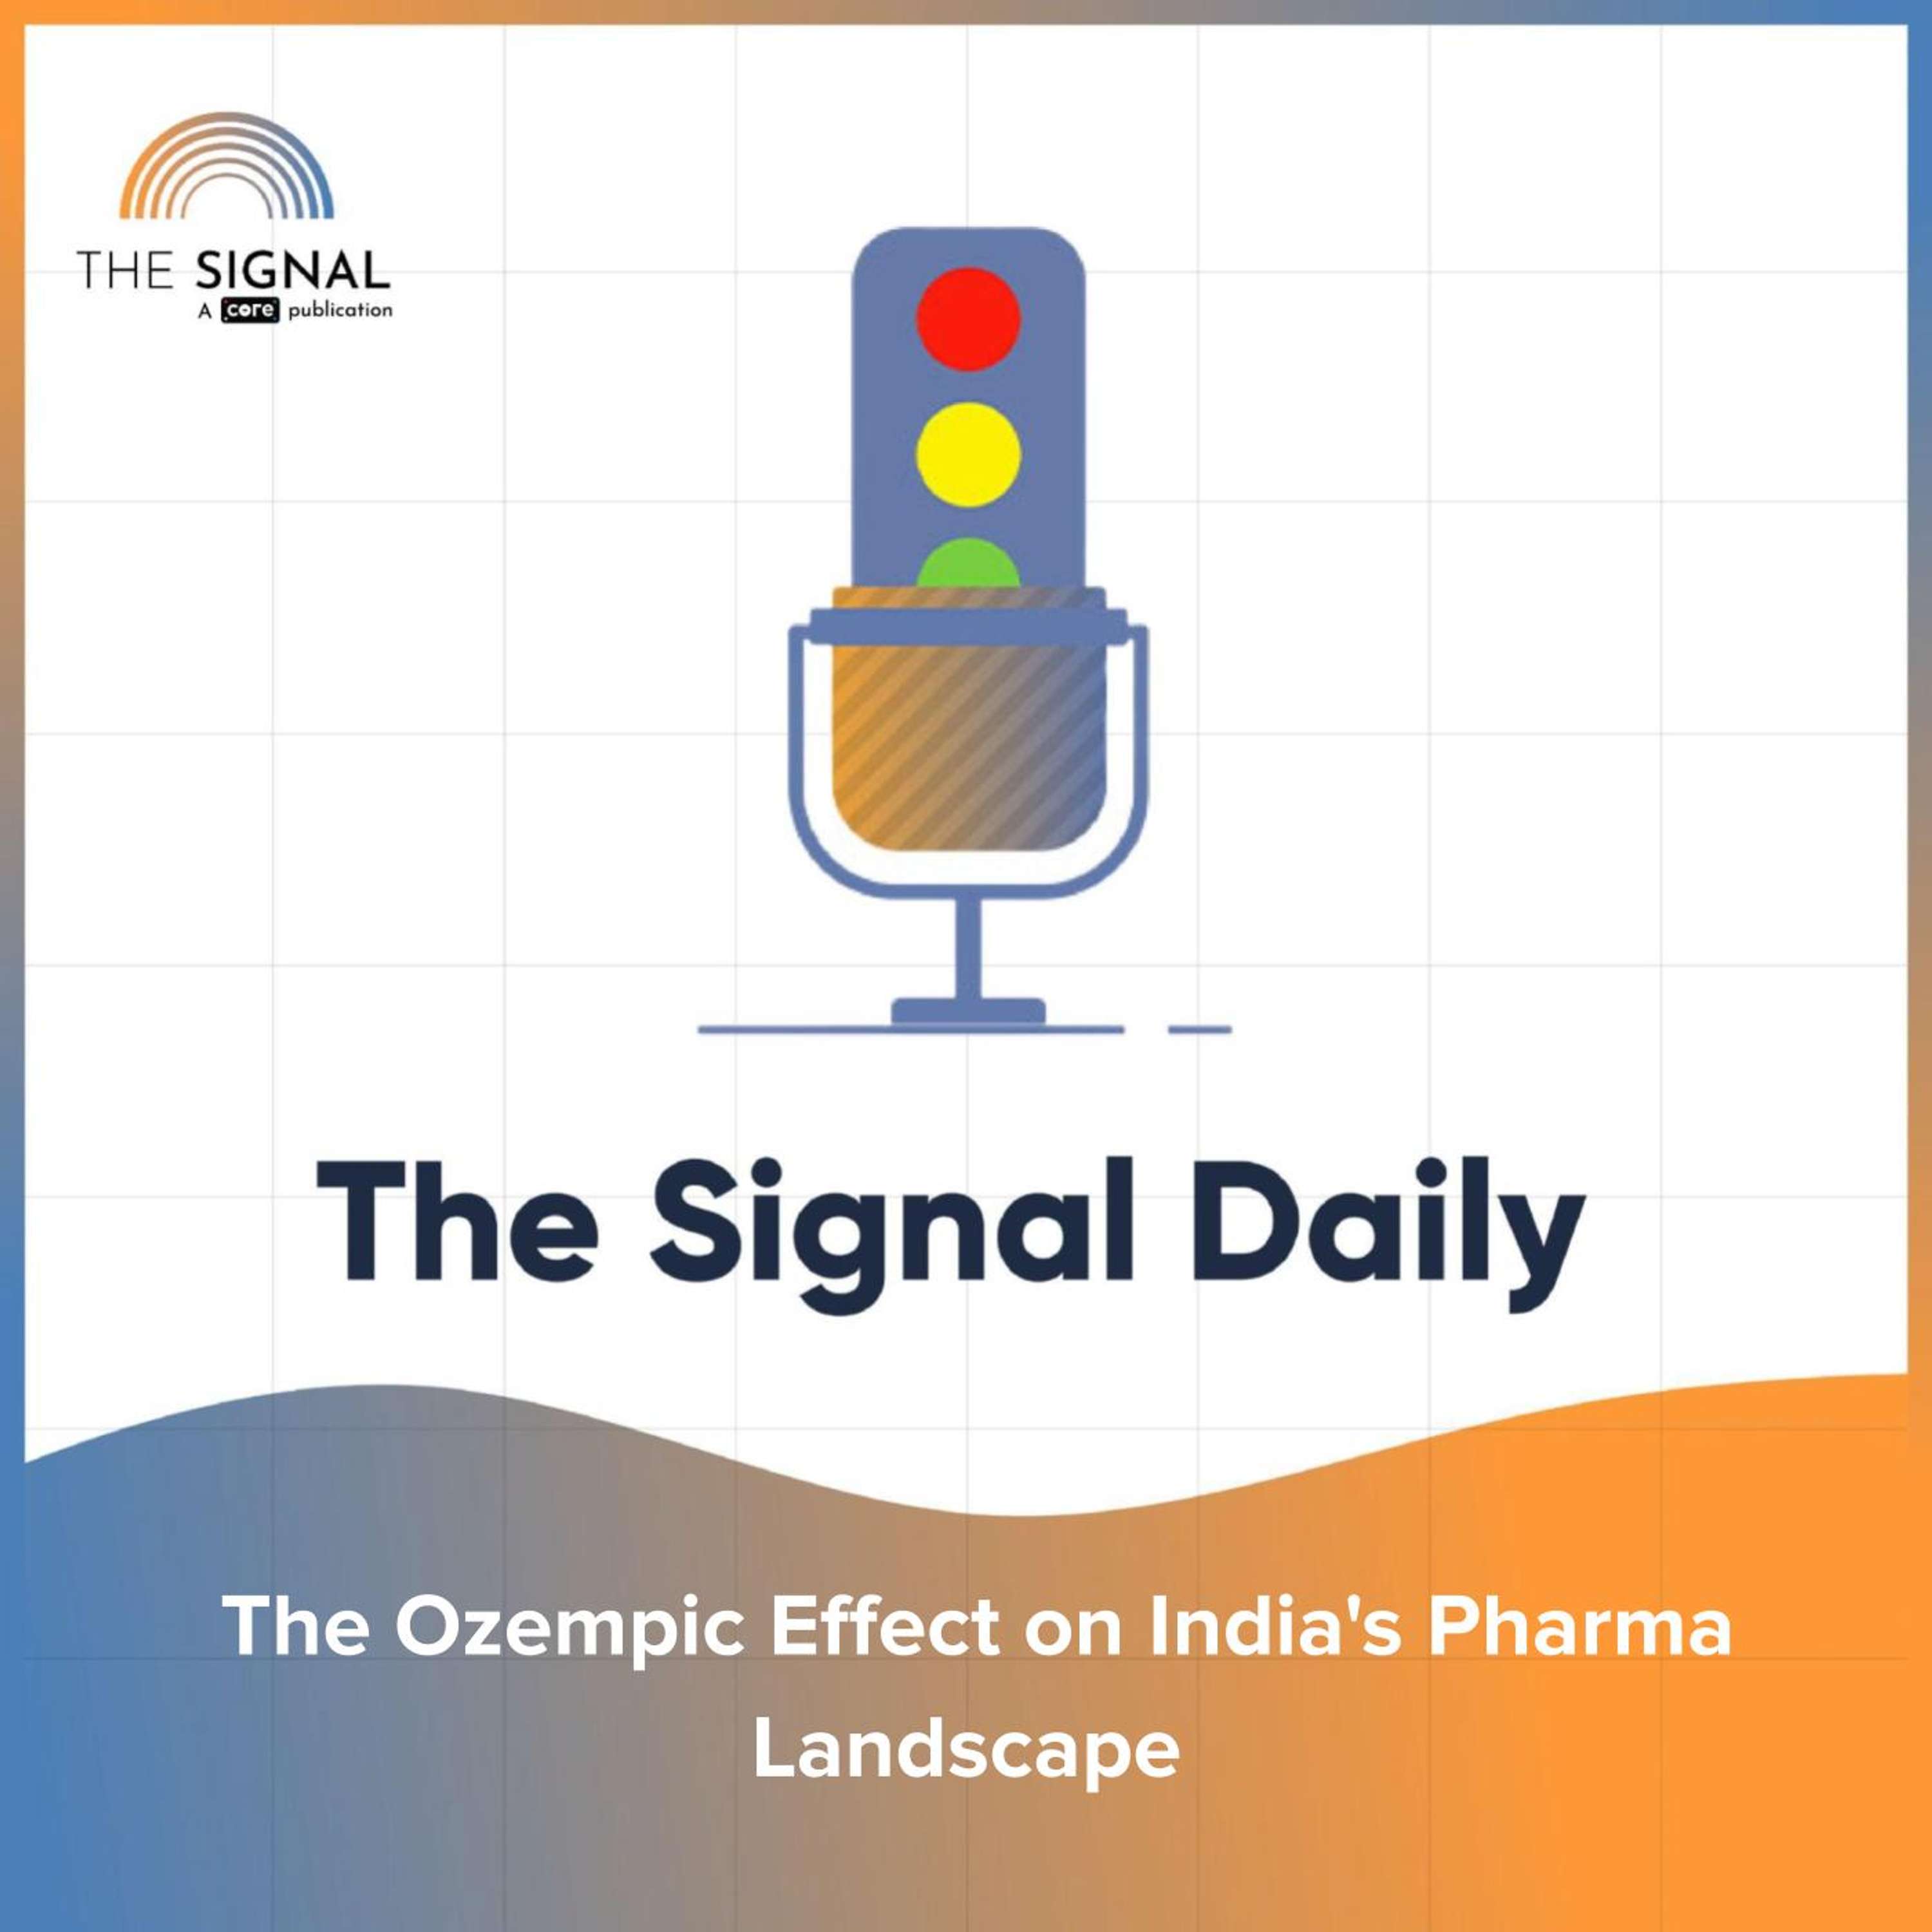 The Ozempic Effect on India's Pharma Landscape